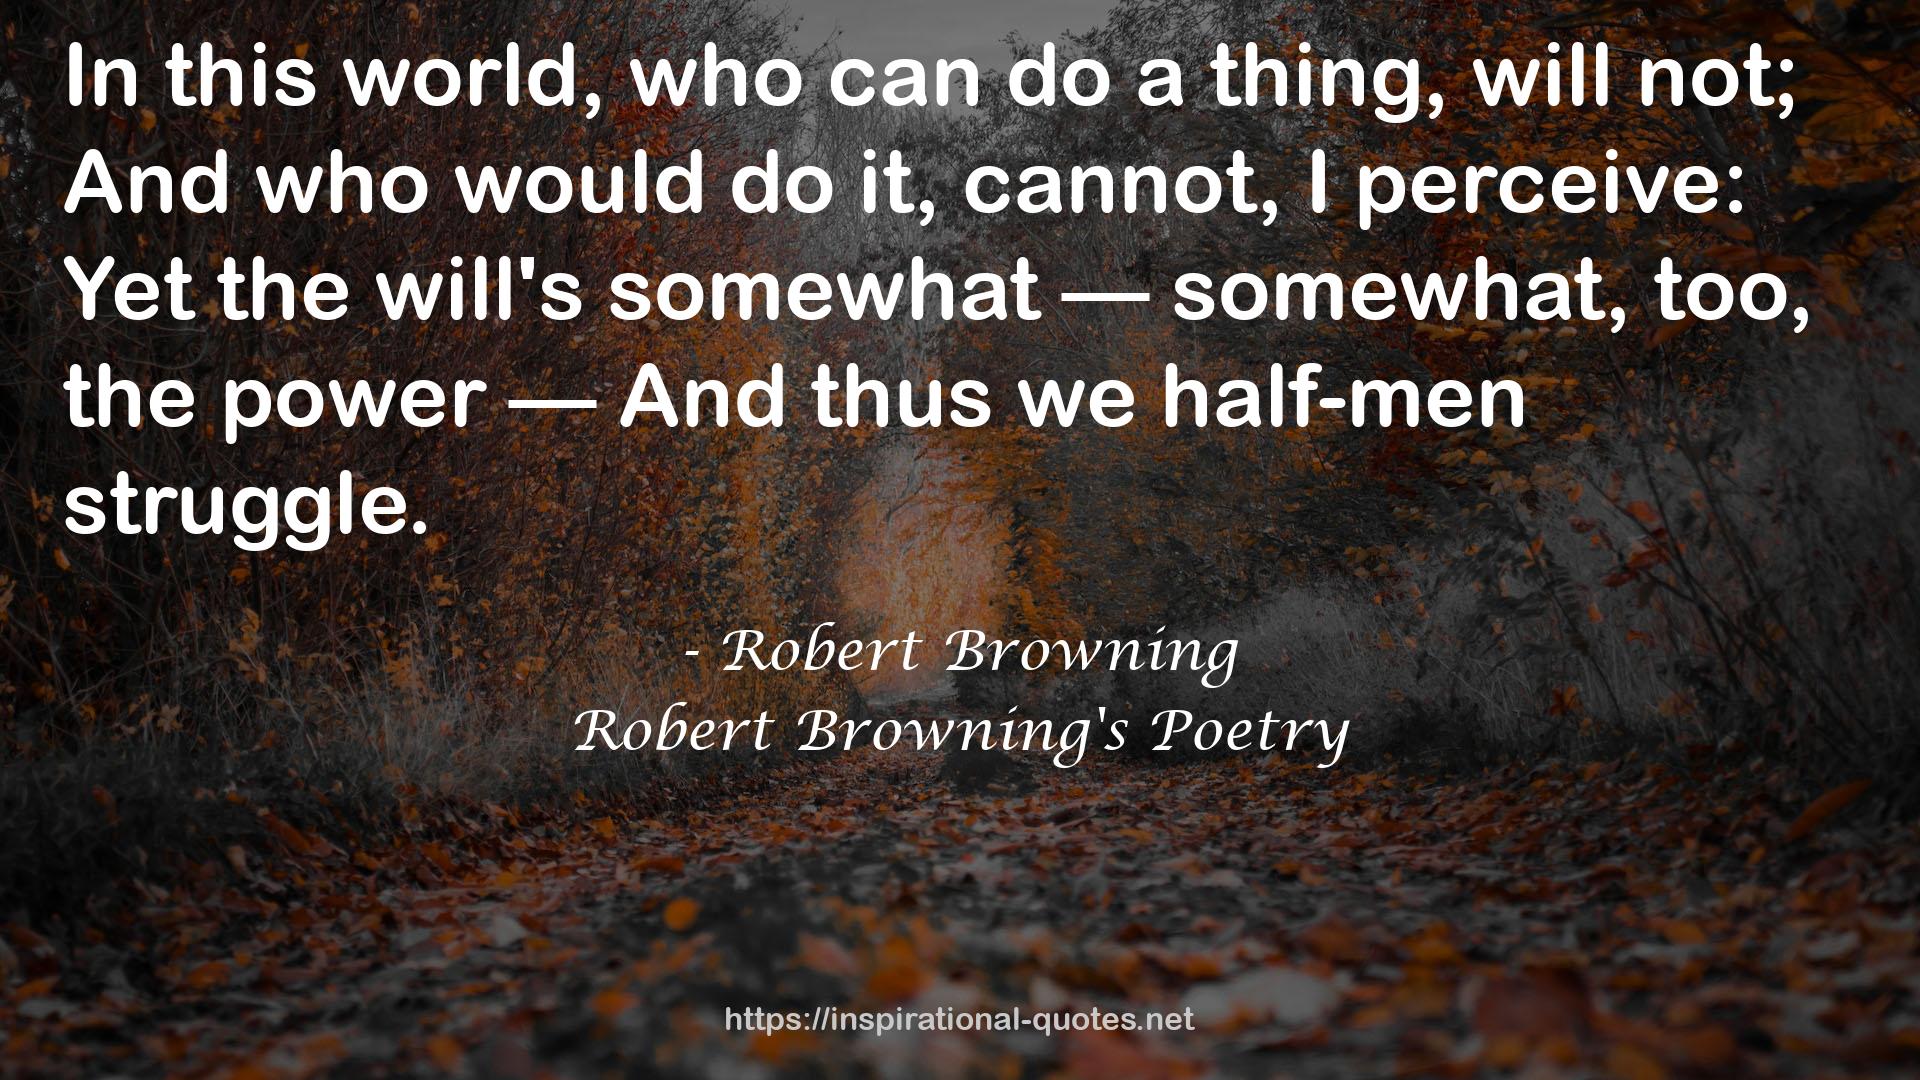 Robert Browning's Poetry QUOTES